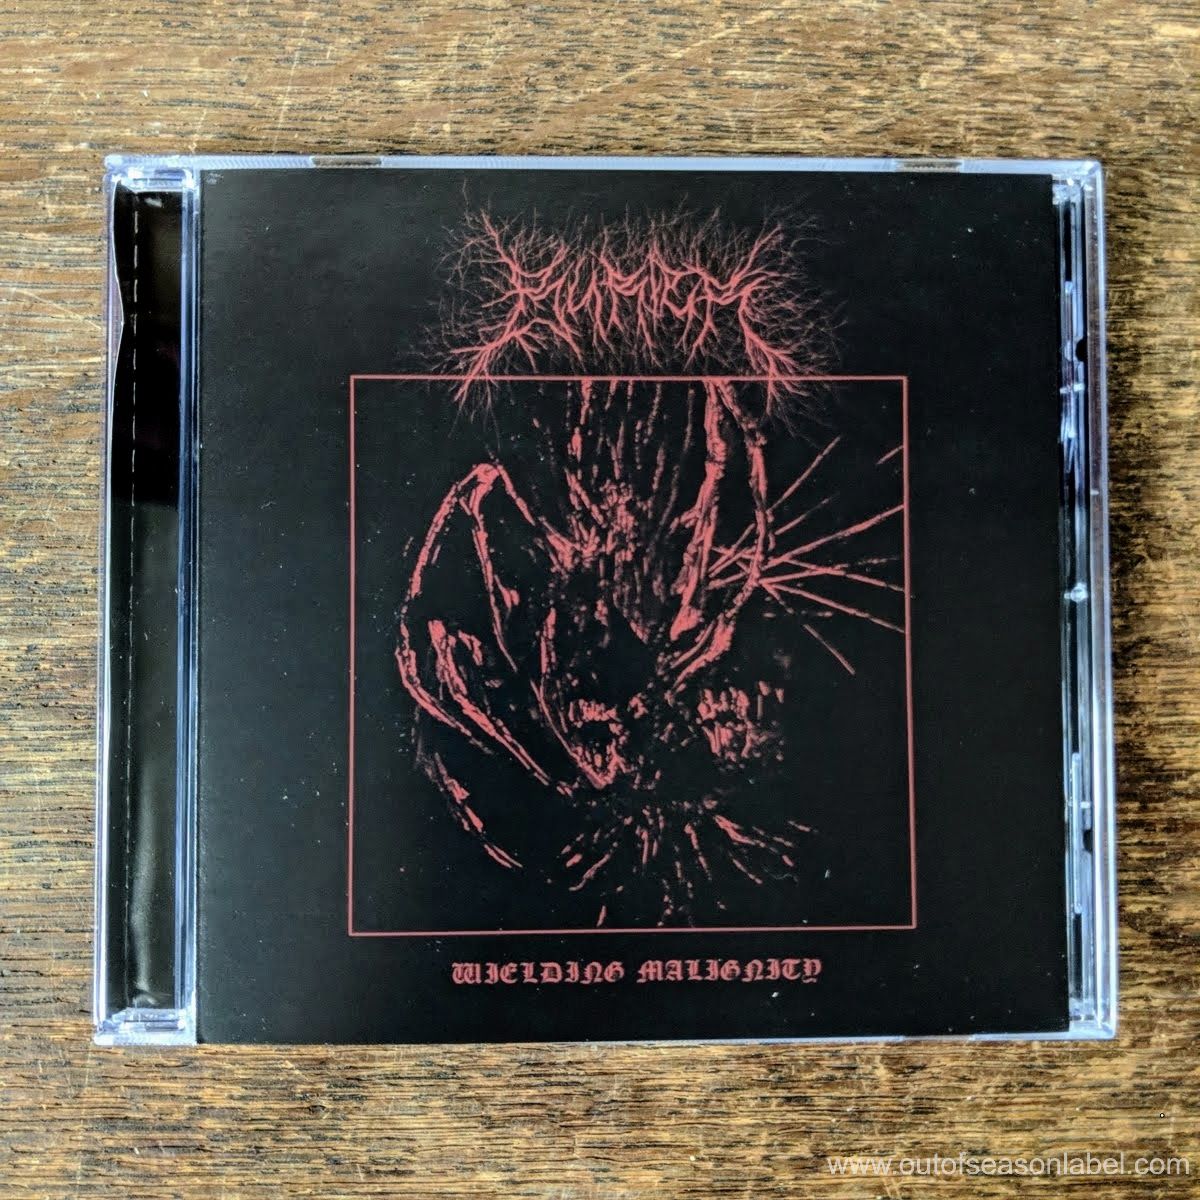 [SOLD OUT] BURIER "IV (Wielding Malignity)" CD